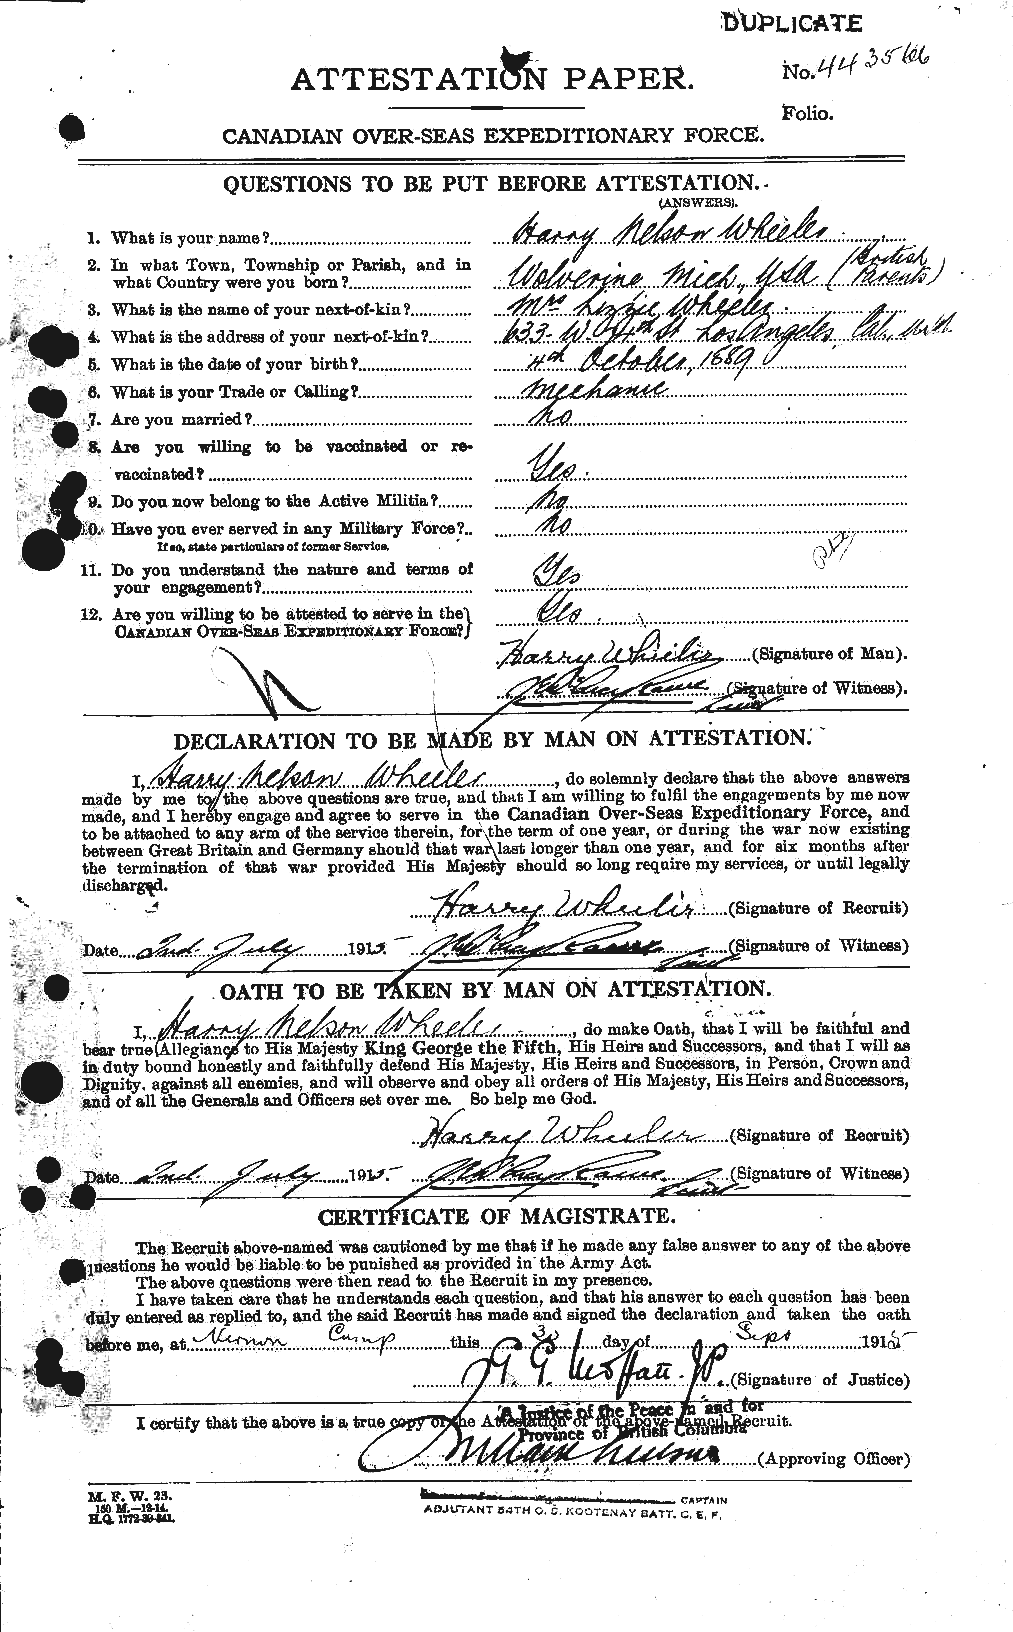 Personnel Records of the First World War - CEF 666567a